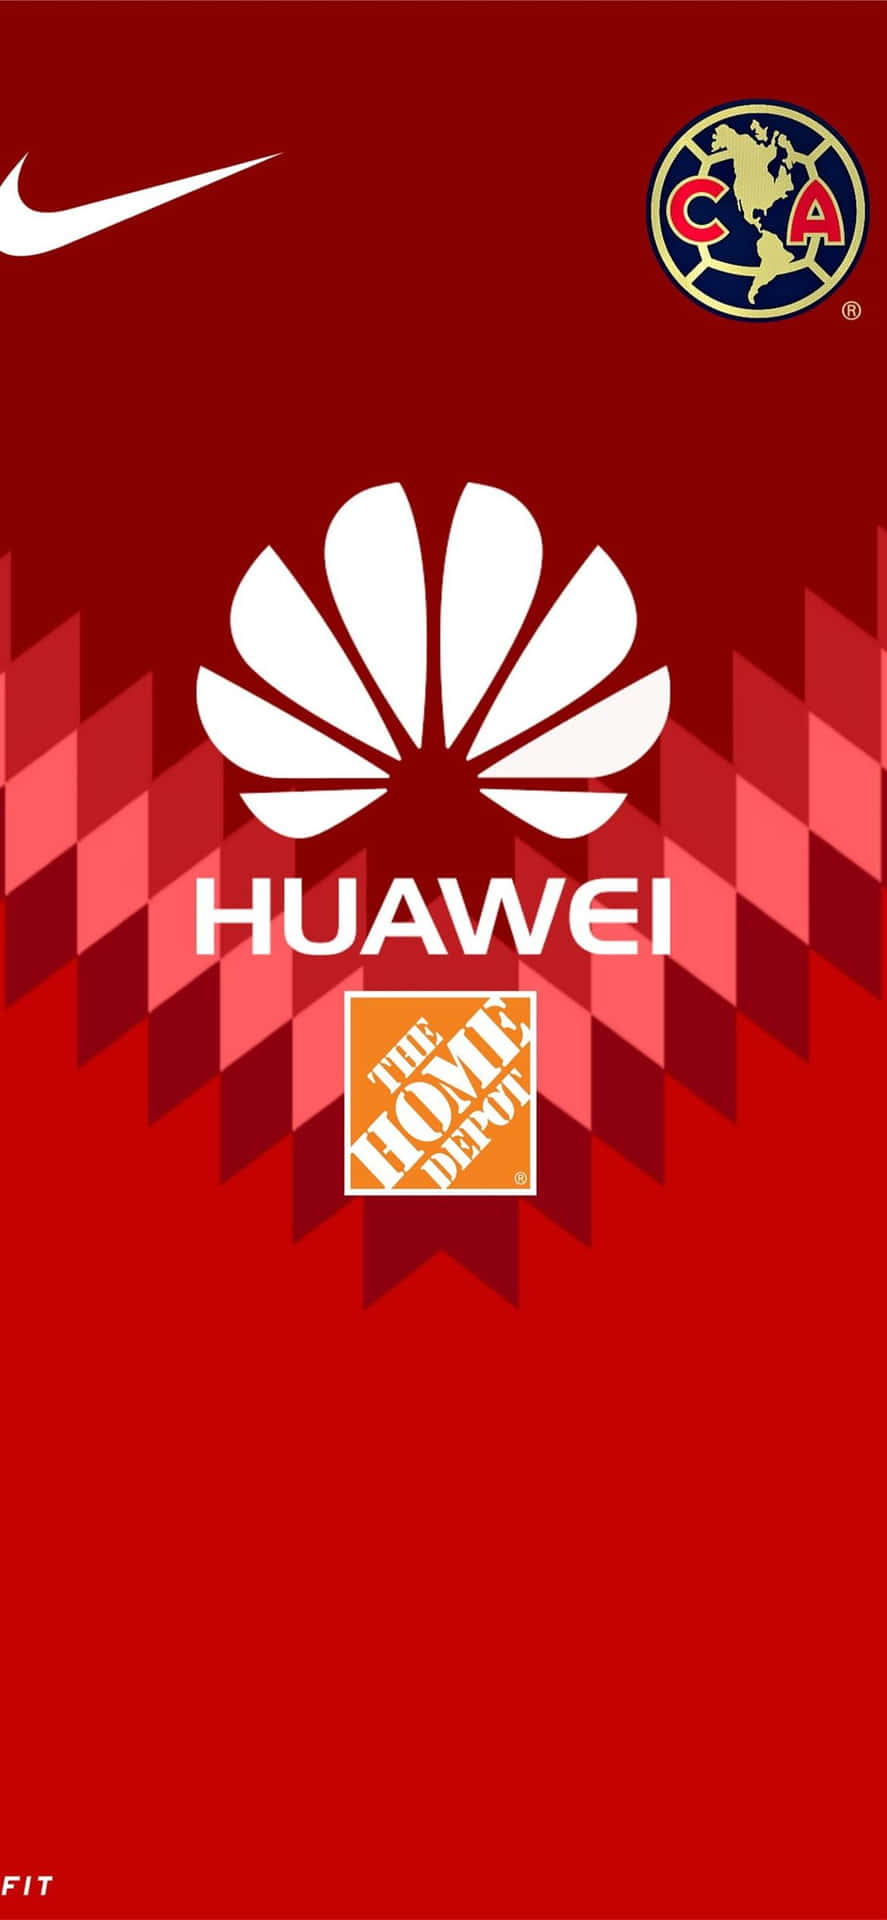 Download A Red And White Nike Logo With The Words Huawei Wallpaper |  